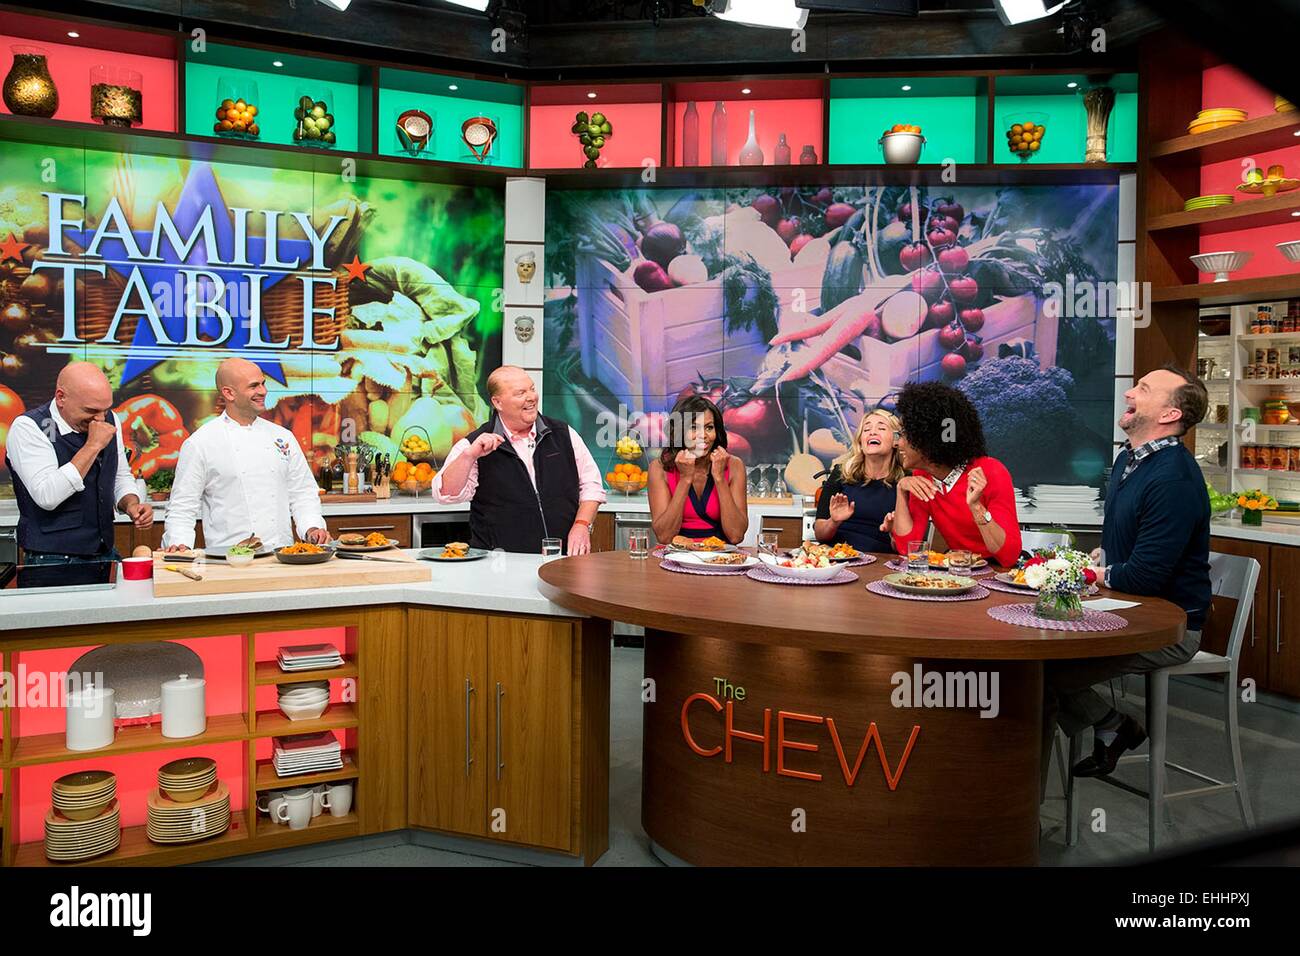 US First Lady Michelle Obama tapes a segment of television show The Chew September 23, 2014 in New York, N.Y. Participants with the First Lady from left are: Michael Symon, Sam Kass, Mario Batali, Daphne Oz, Carla Hall and Clinton Kelly. Stock Photo